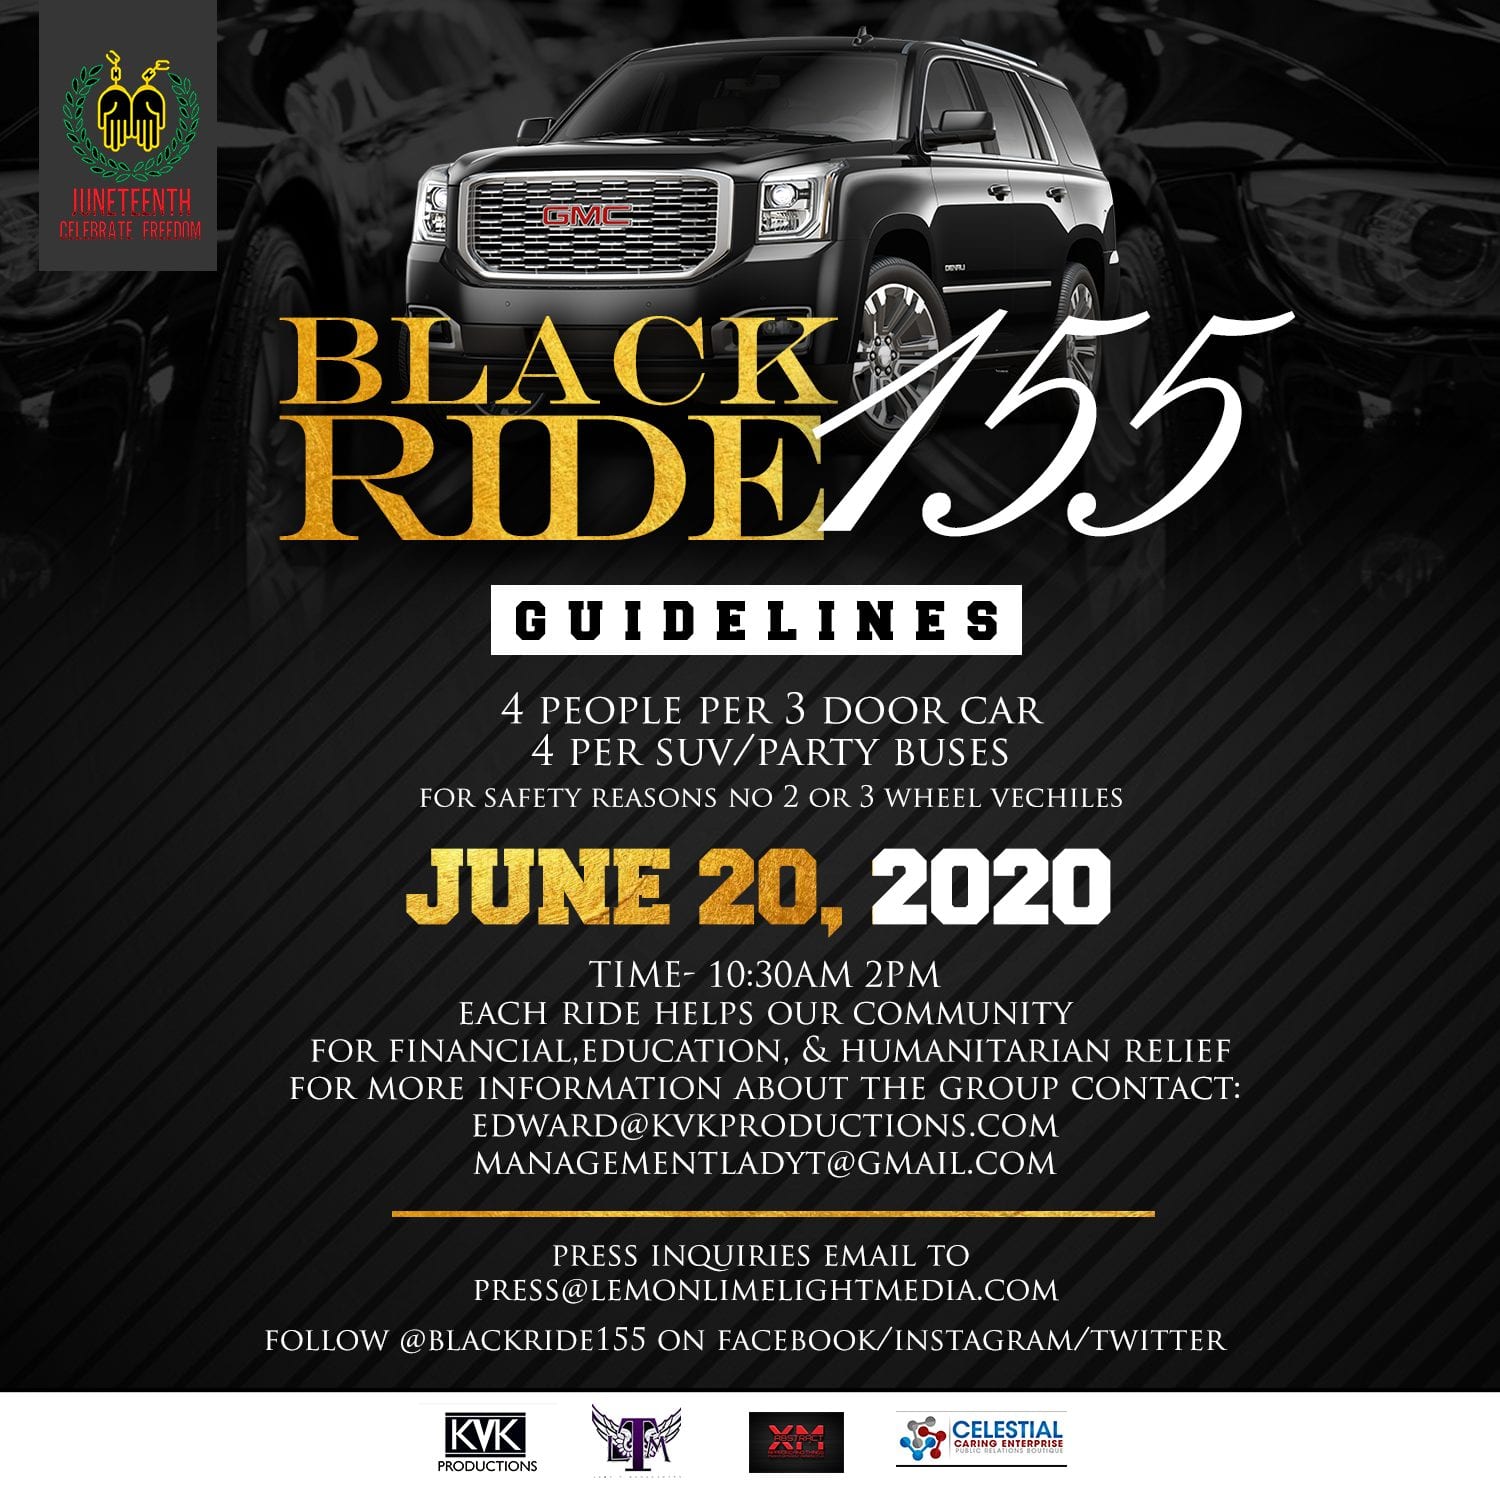 Houston-Based Film/ TV Production Company Will Host A Black Ride In Honor Of Juneteenth!